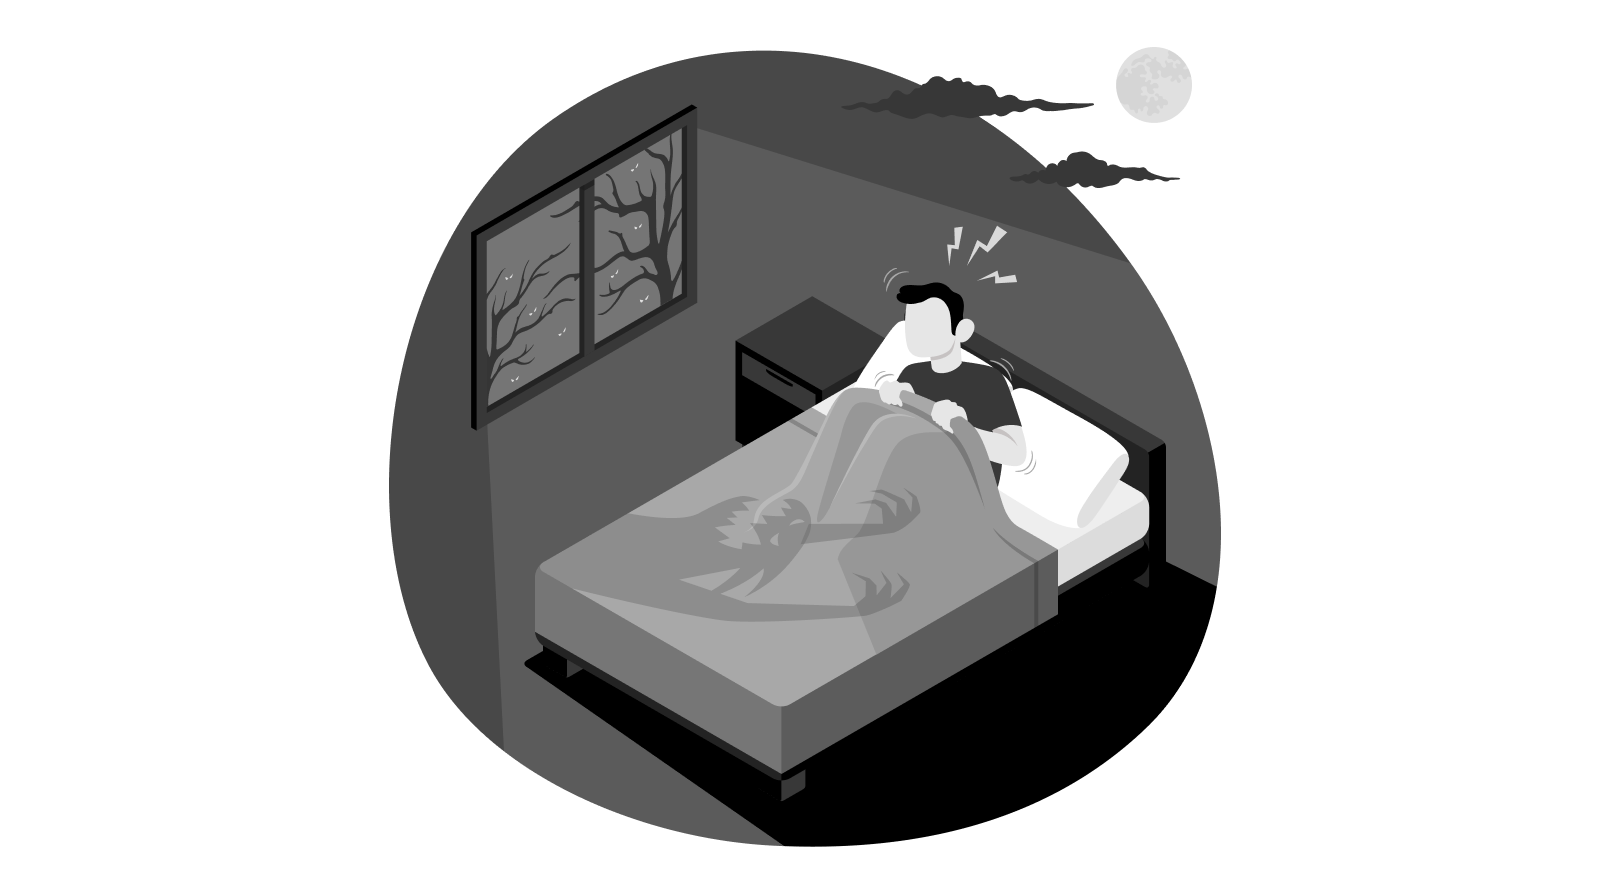 Treating nightmares with lucid dreams